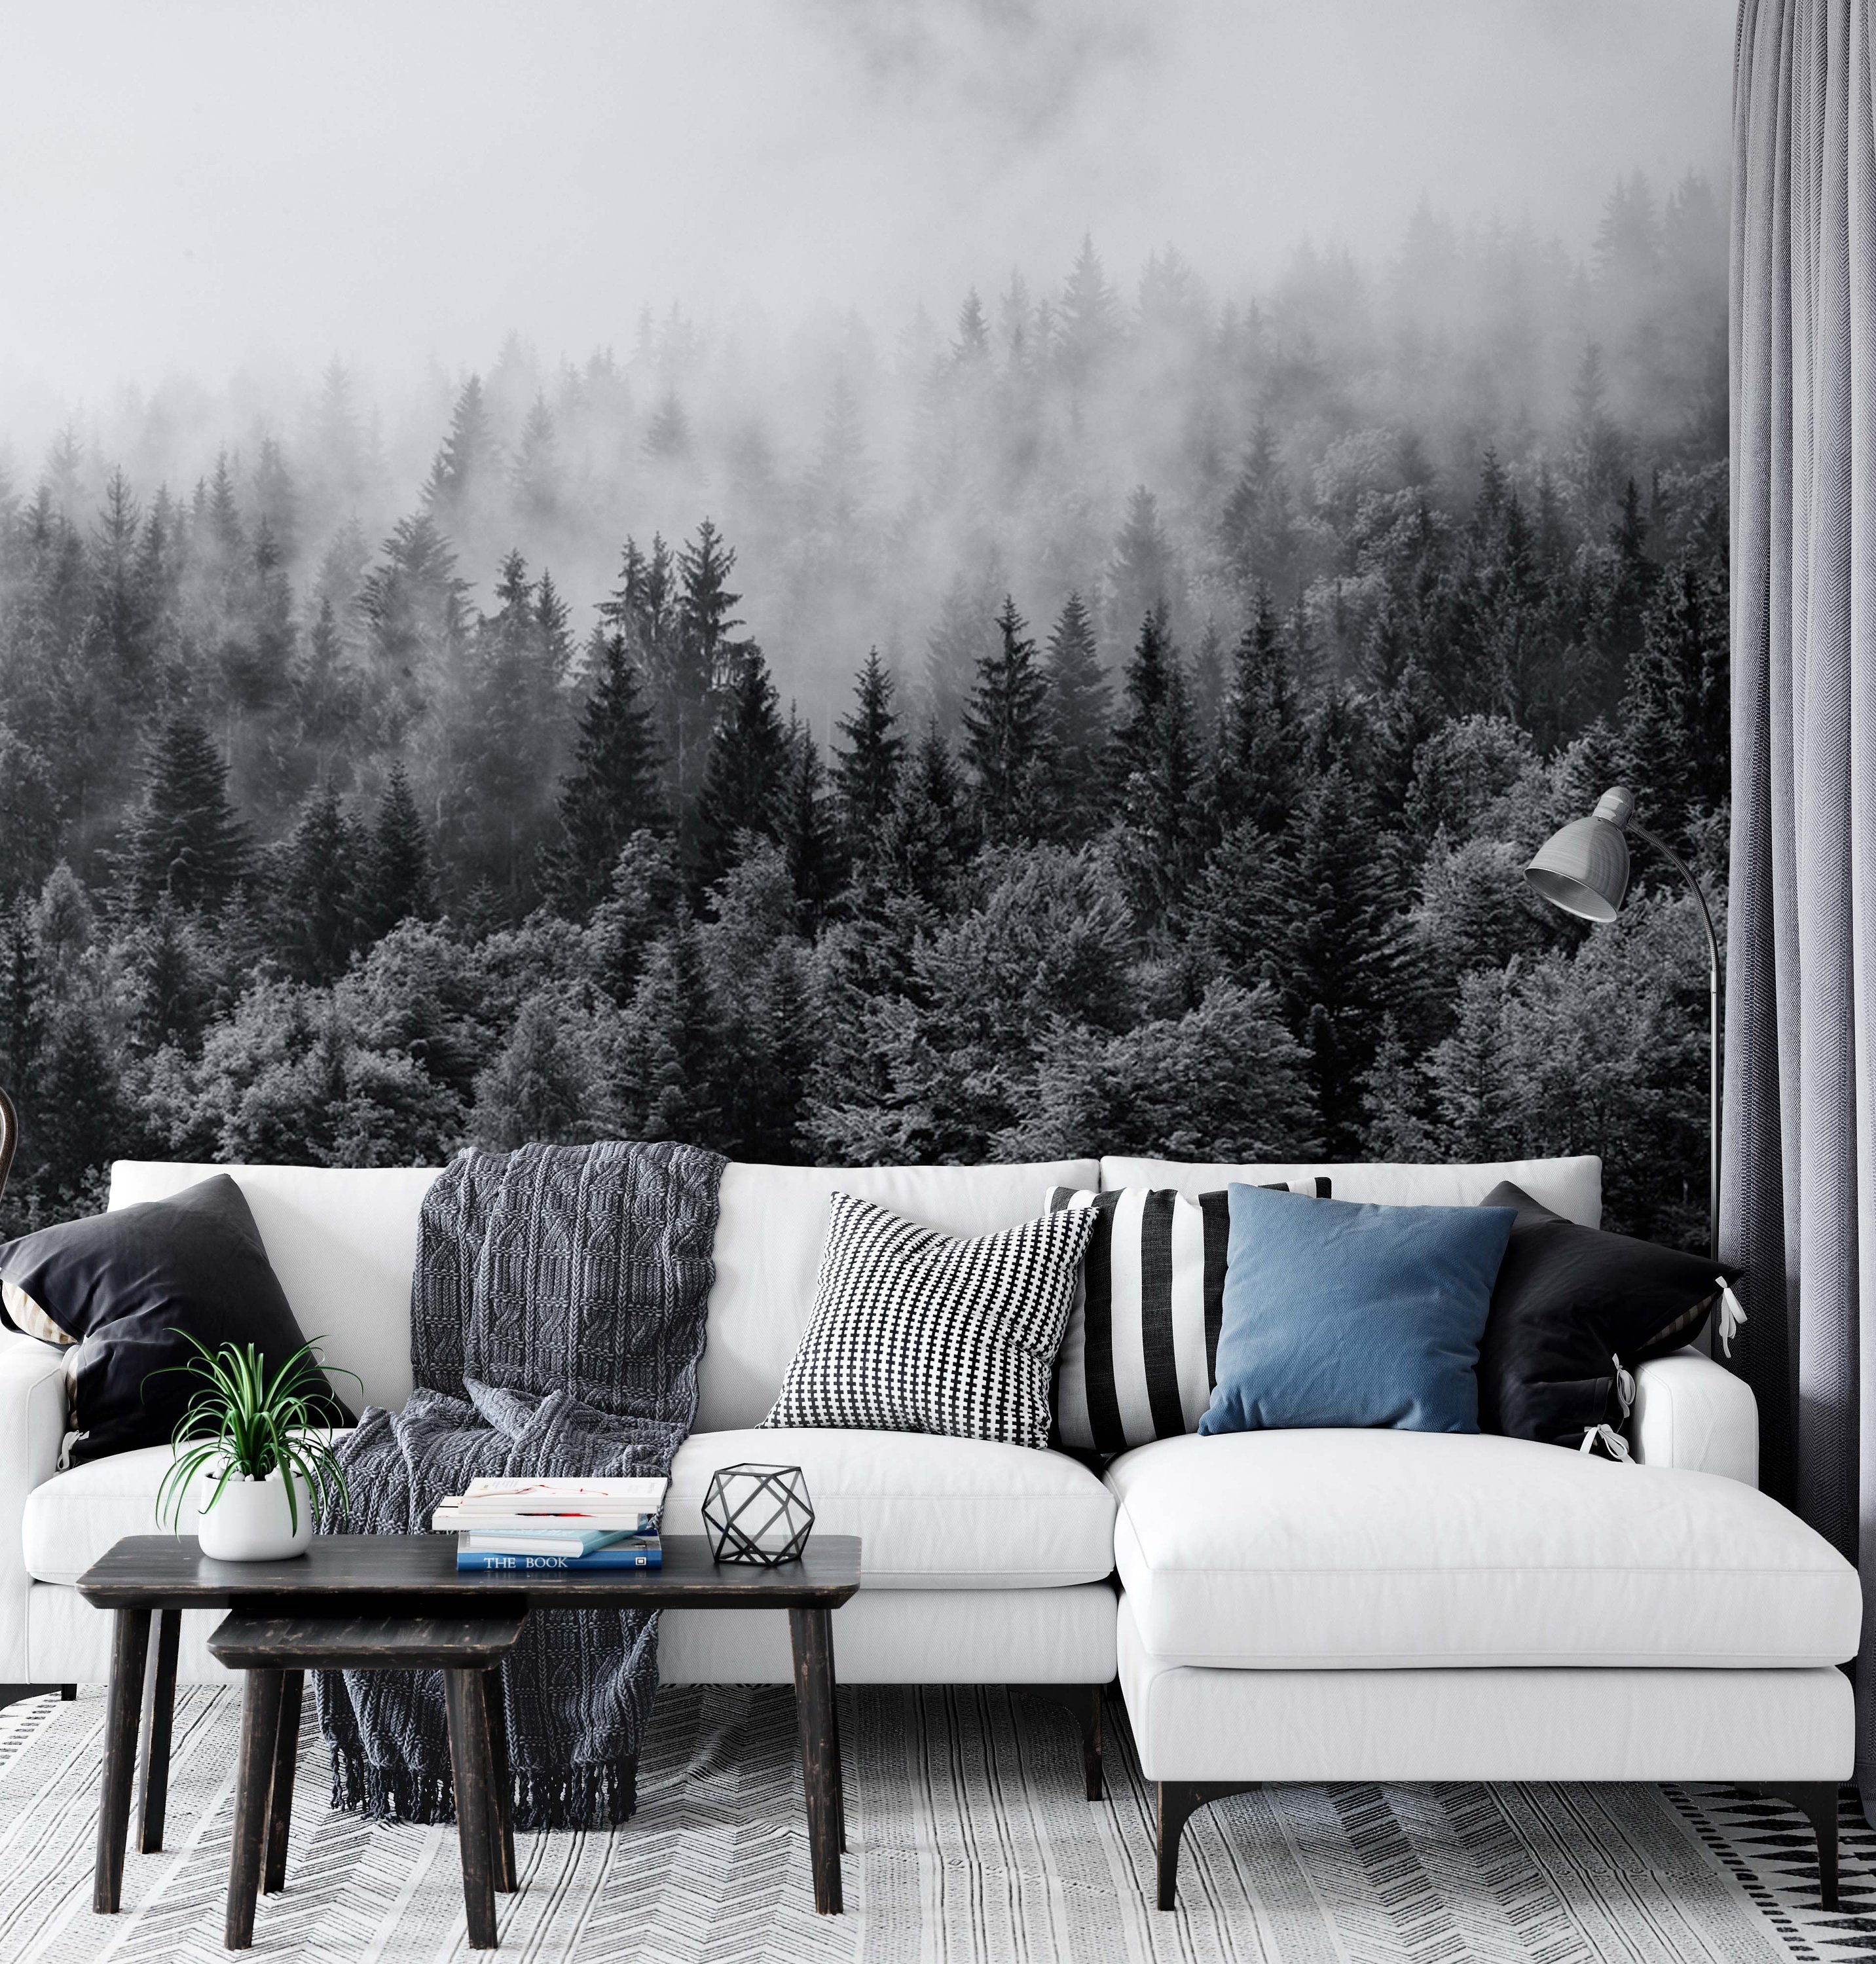 Misty Forests Evergreen Coniferous Trees Nature Wallpaper Cafe Restaurant Decoration Living Room Bedroom Wall Covering Mural Home Decor Art